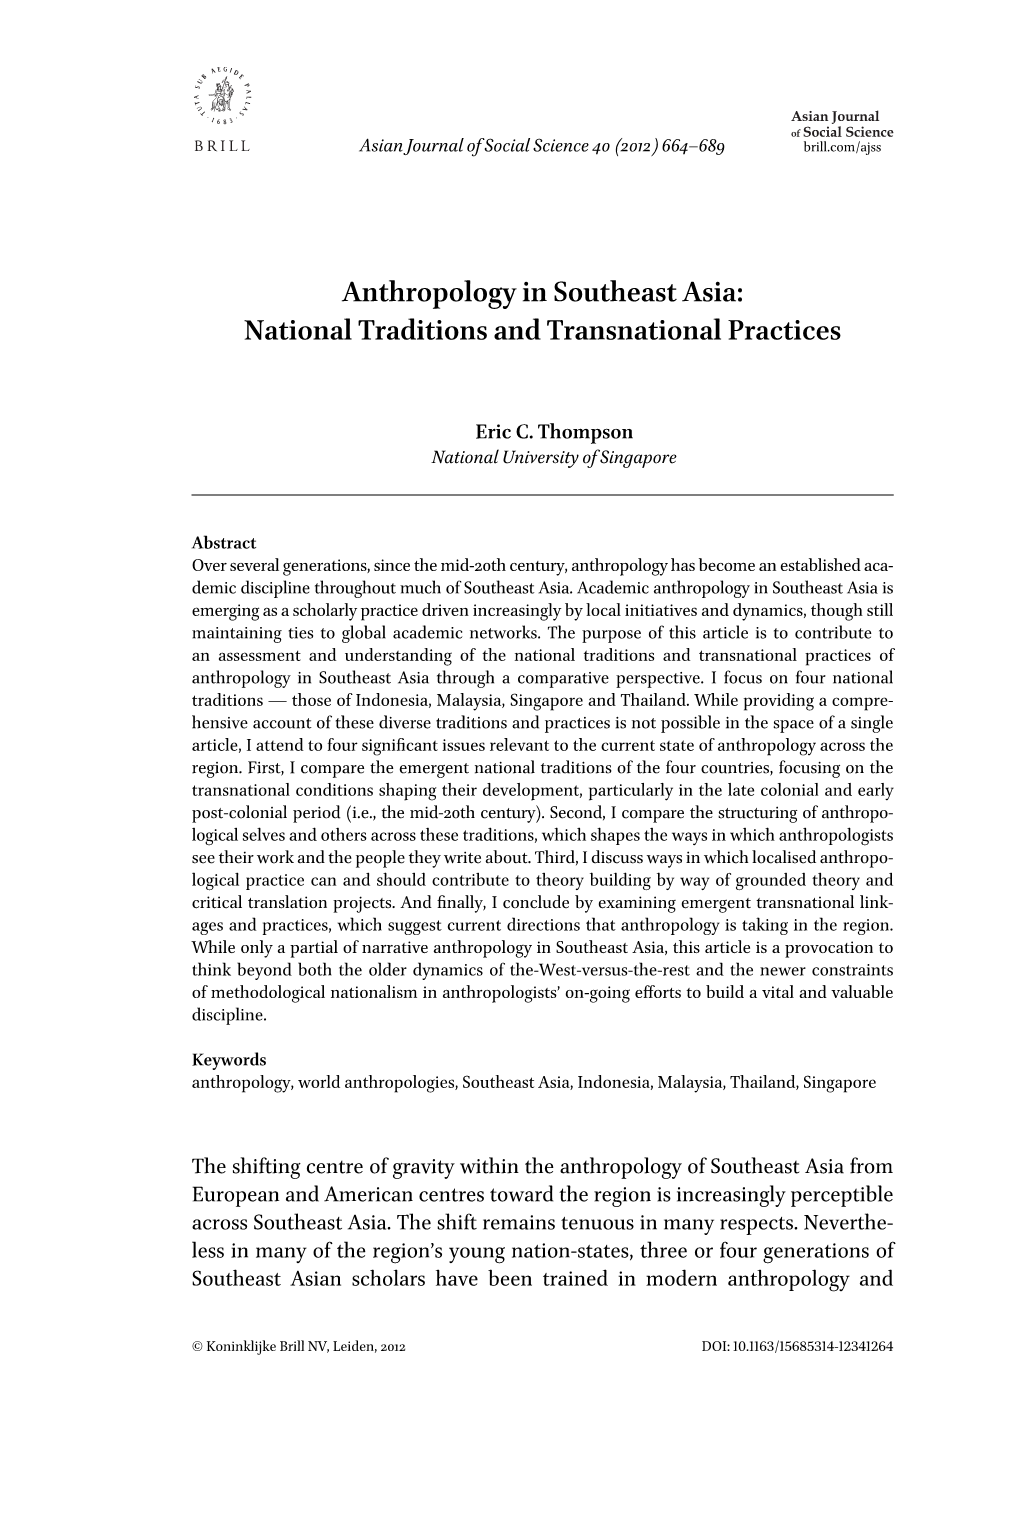 Anthropology in Southeast Asia: National Traditions and Transnational Practices